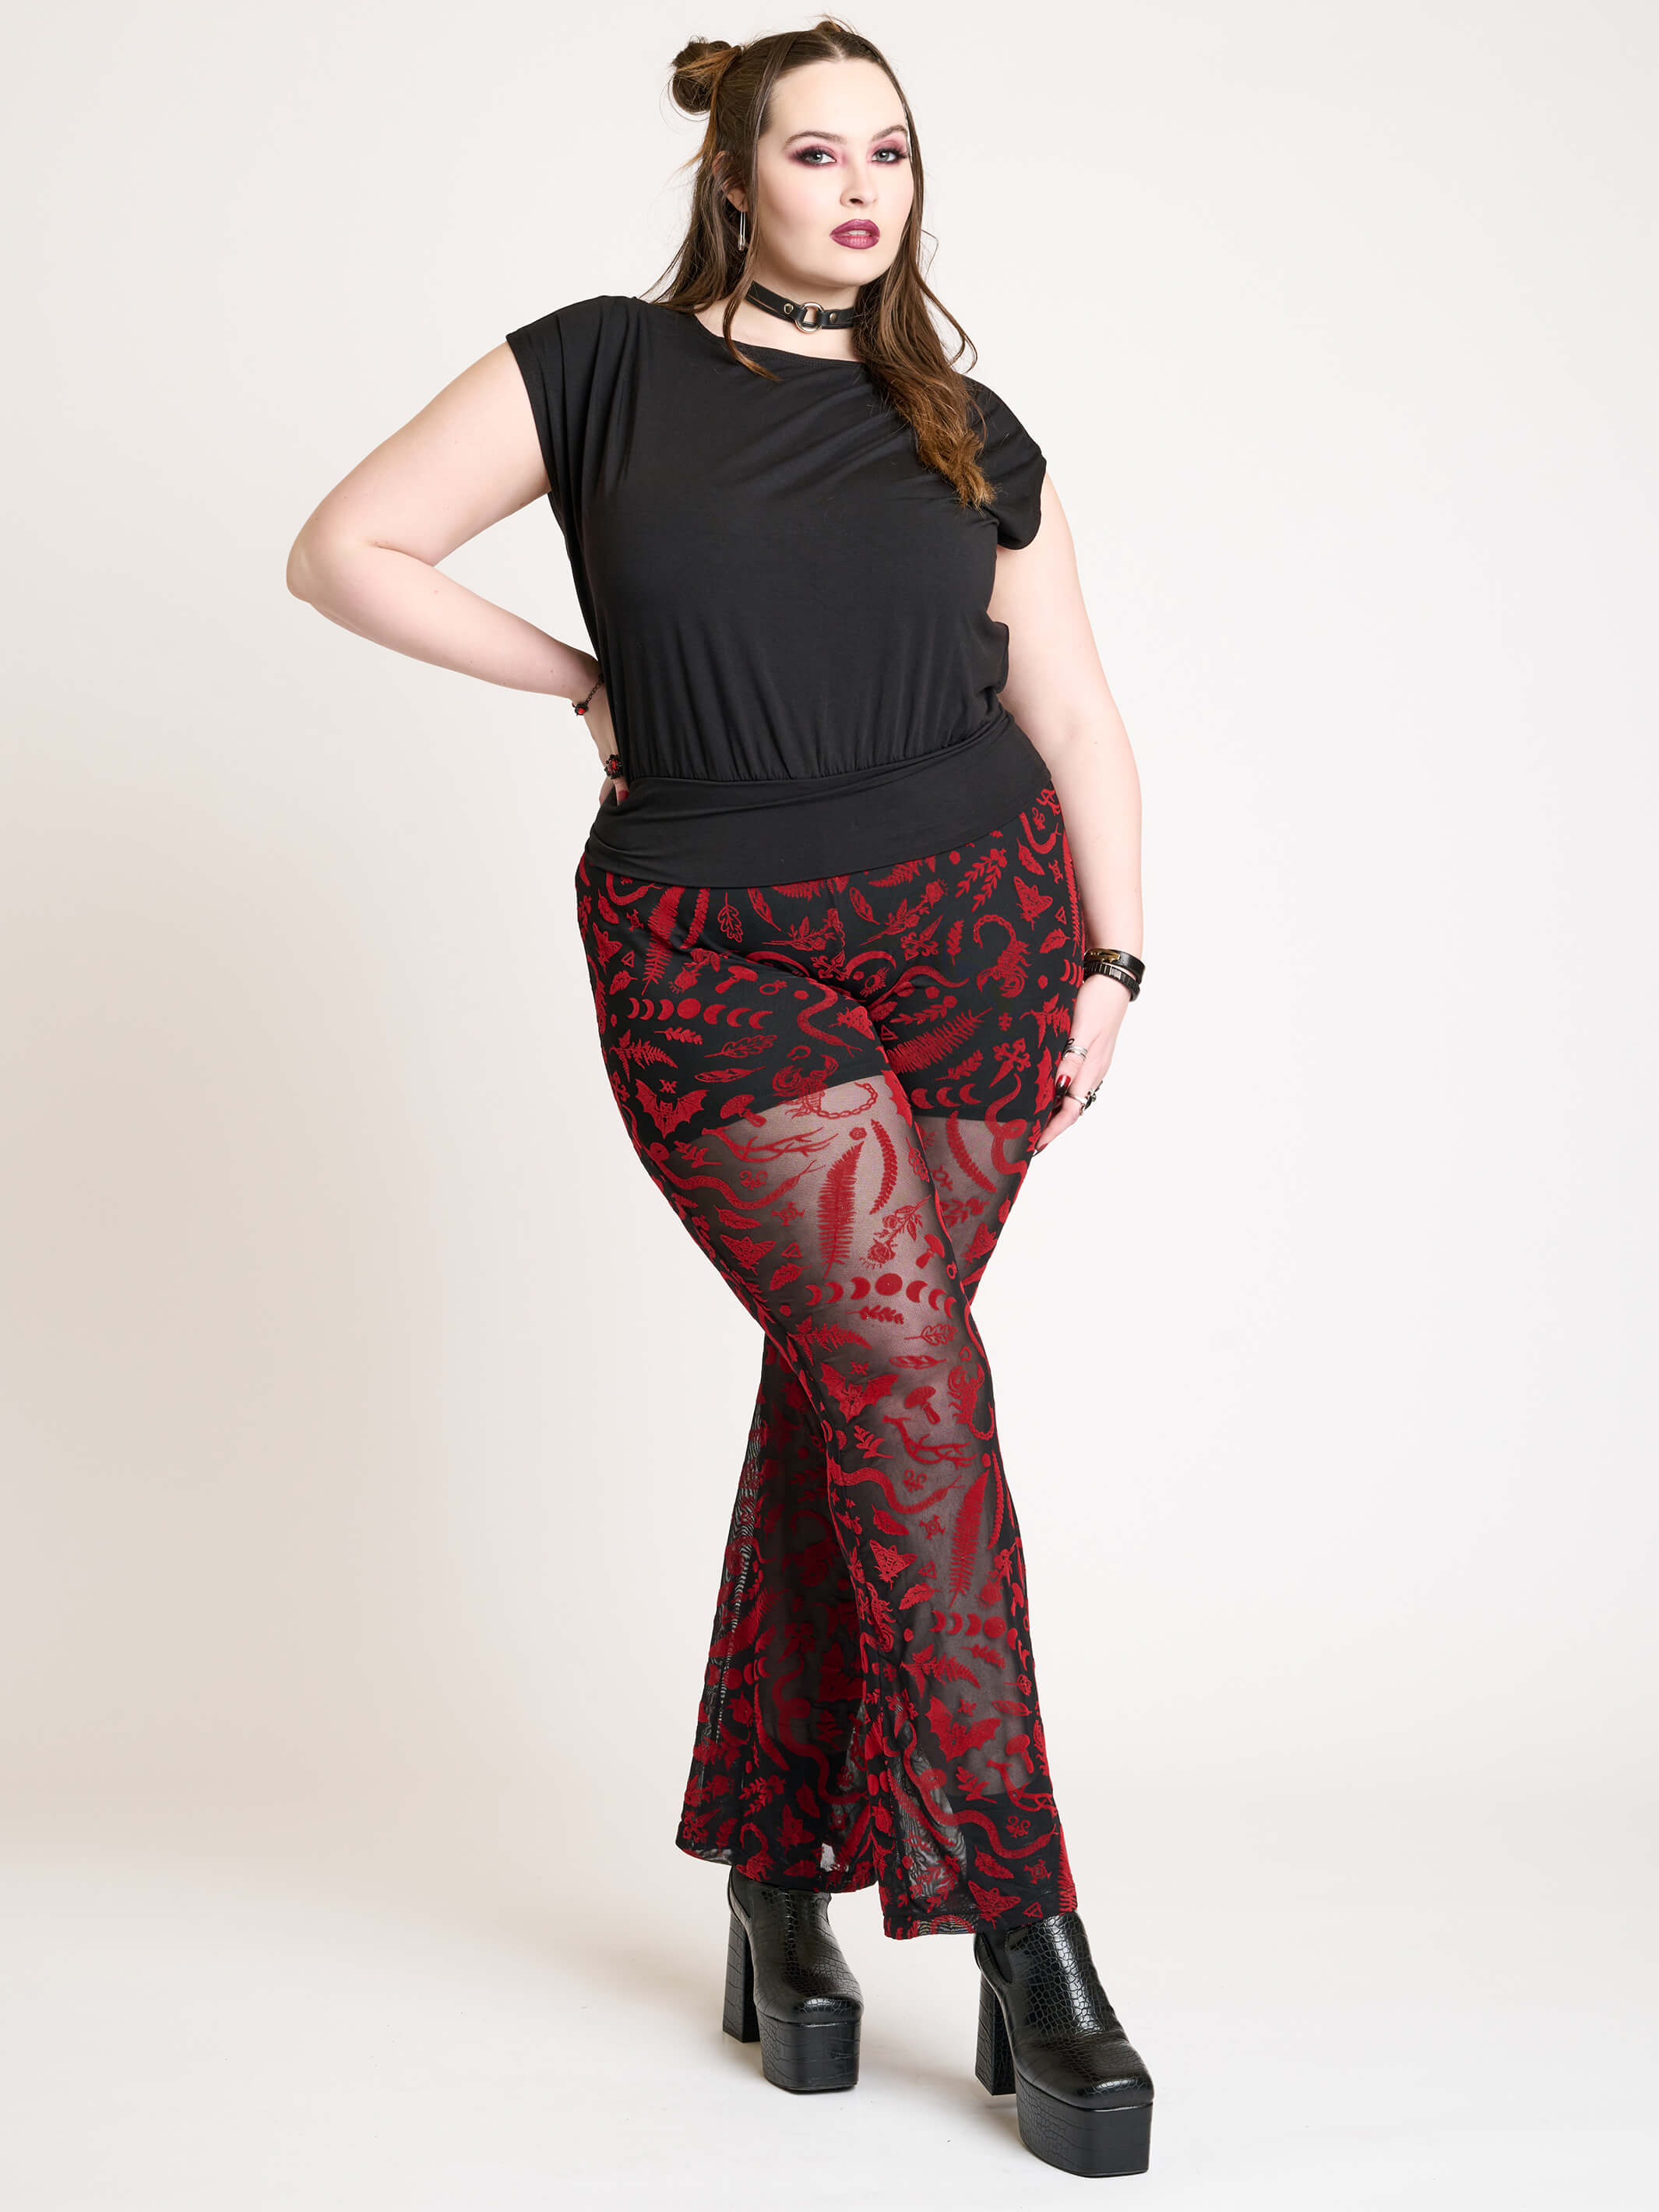 Plus Size Goth Clothing: Where to Find the Best Outfits, Stores